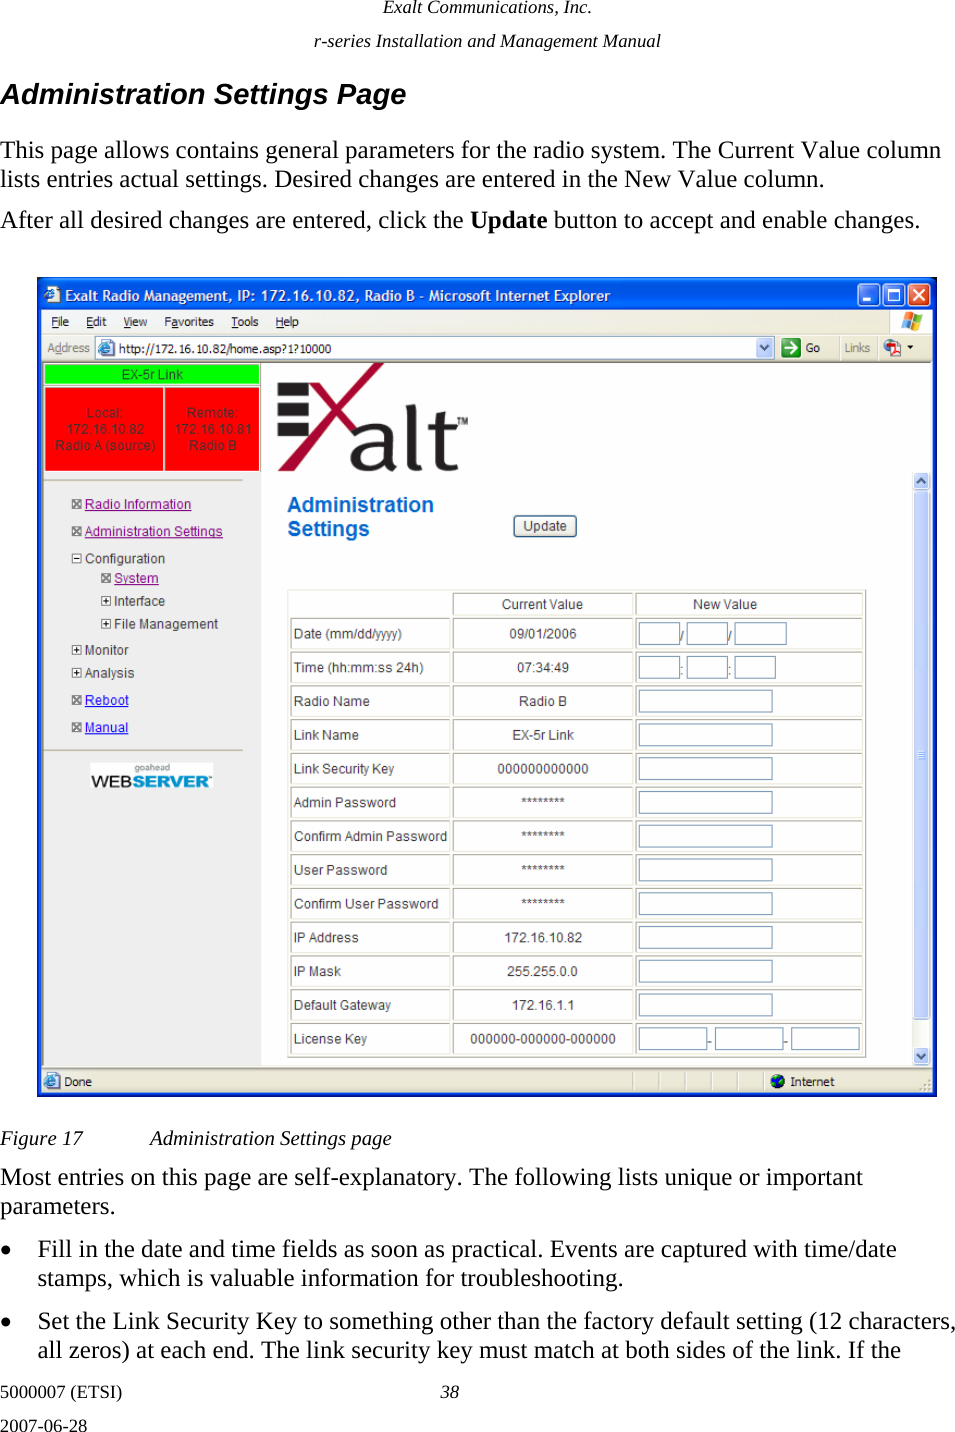 Exalt Communications, Inc. r-series Installation and Management Manual 5000007 (ETSI)  38 2007-06-28  Administration Settings Page This page allows contains general parameters for the radio system. The Current Value column lists entries actual settings. Desired changes are entered in the New Value column. After all desired changes are entered, click the Update button to accept and enable changes.  Figure 17  Administration Settings page Most entries on this page are self-explanatory. The following lists unique or important parameters. • Fill in the date and time fields as soon as practical. Events are captured with time/date stamps, which is valuable information for troubleshooting. • Set the Link Security Key to something other than the factory default setting (12 characters, all zeros) at each end. The link security key must match at both sides of the link. If the 